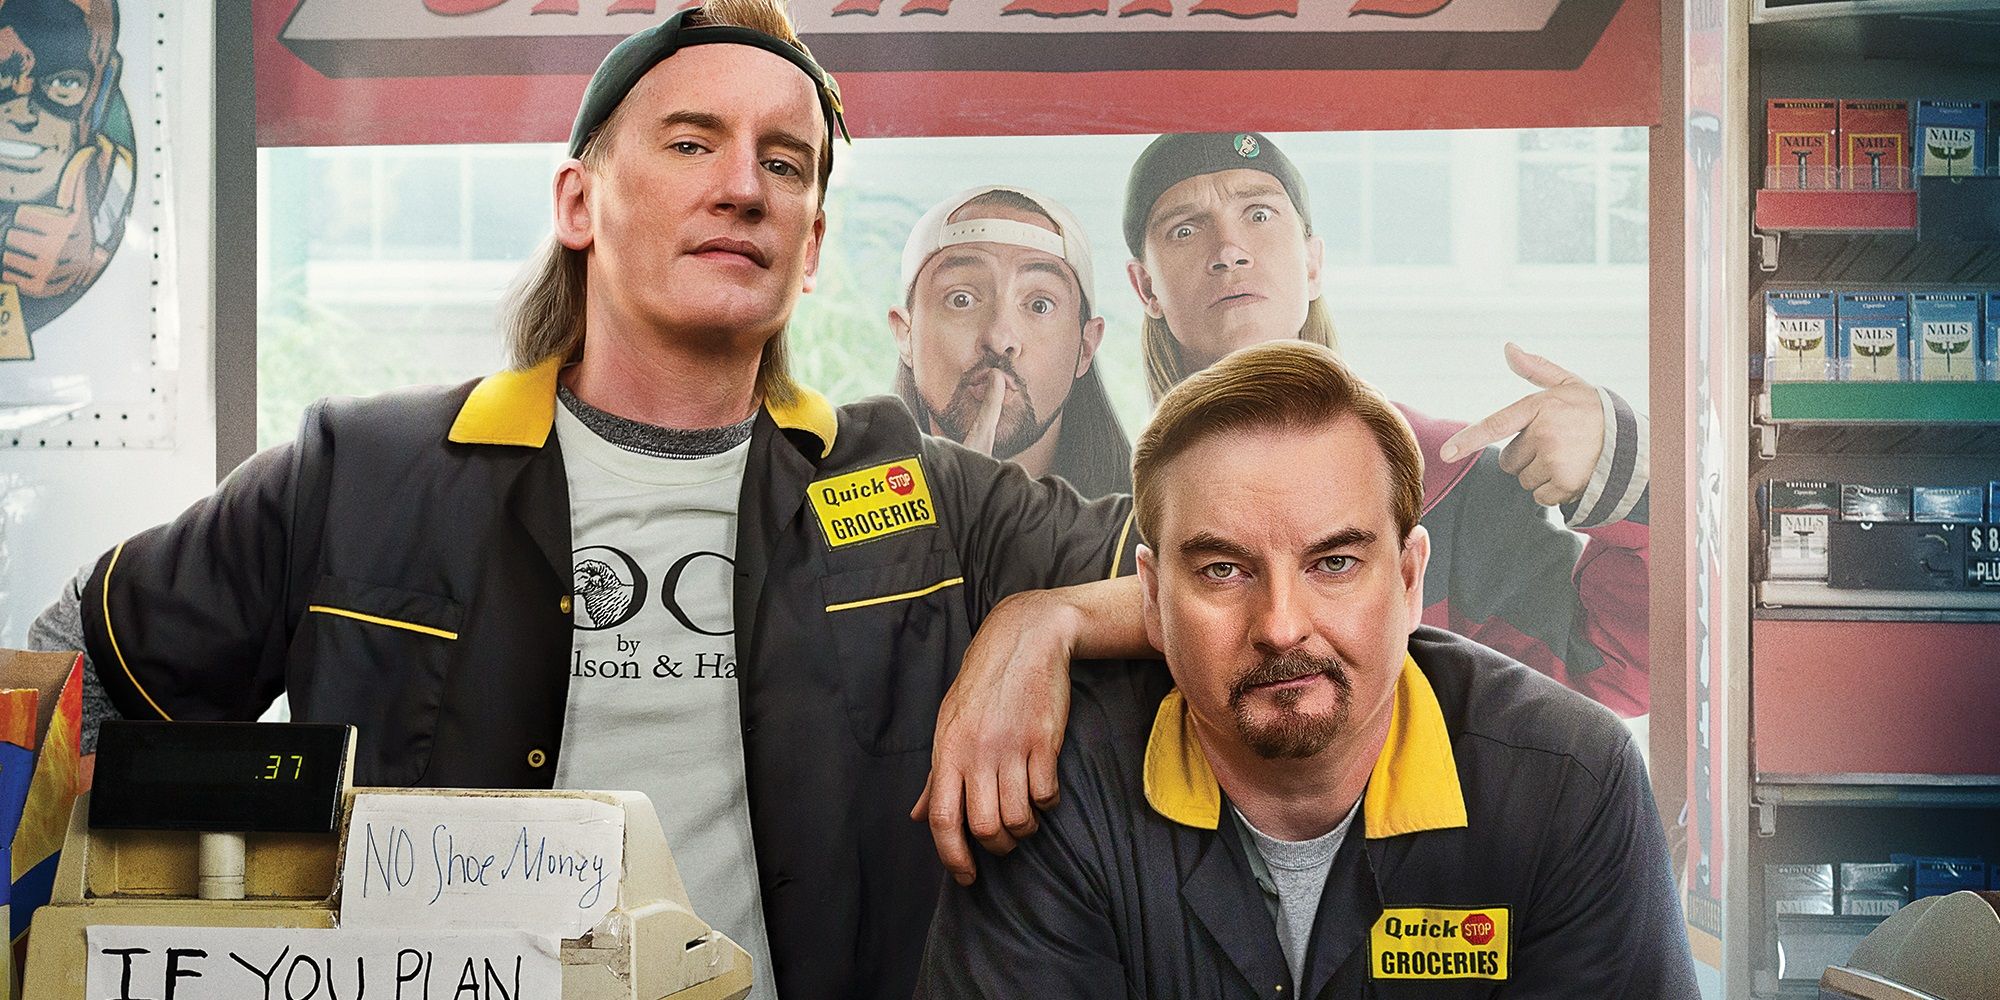 Dante and Randal on the poster for Clerks III